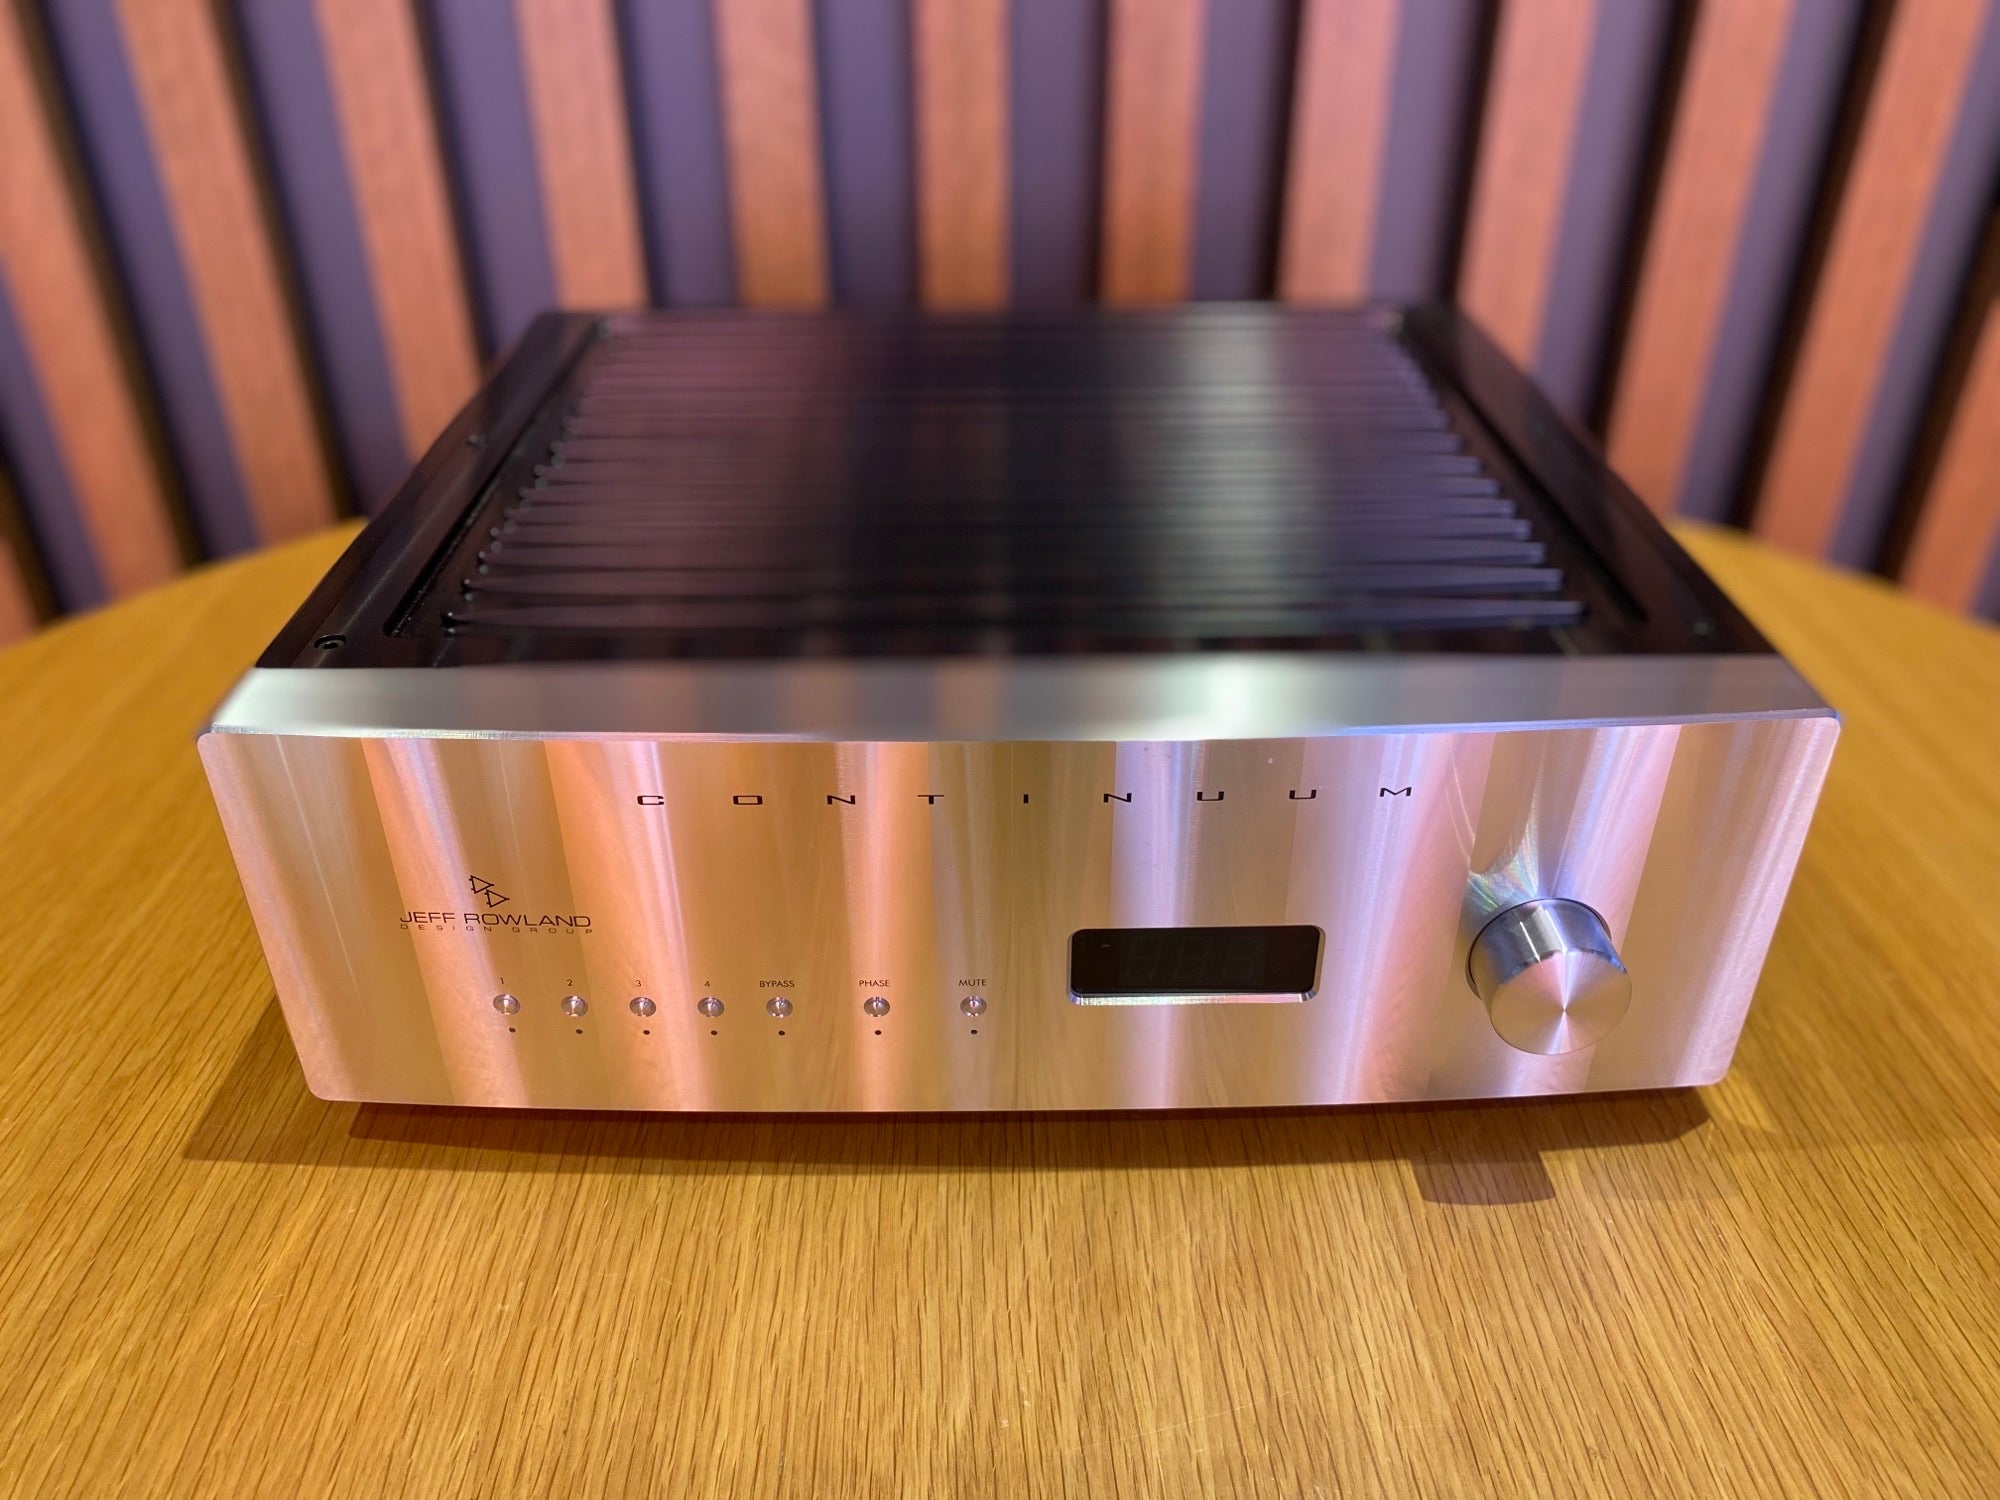 Jeff Roland Continuum S2 Integrated Amplifier with DAC - Consignment